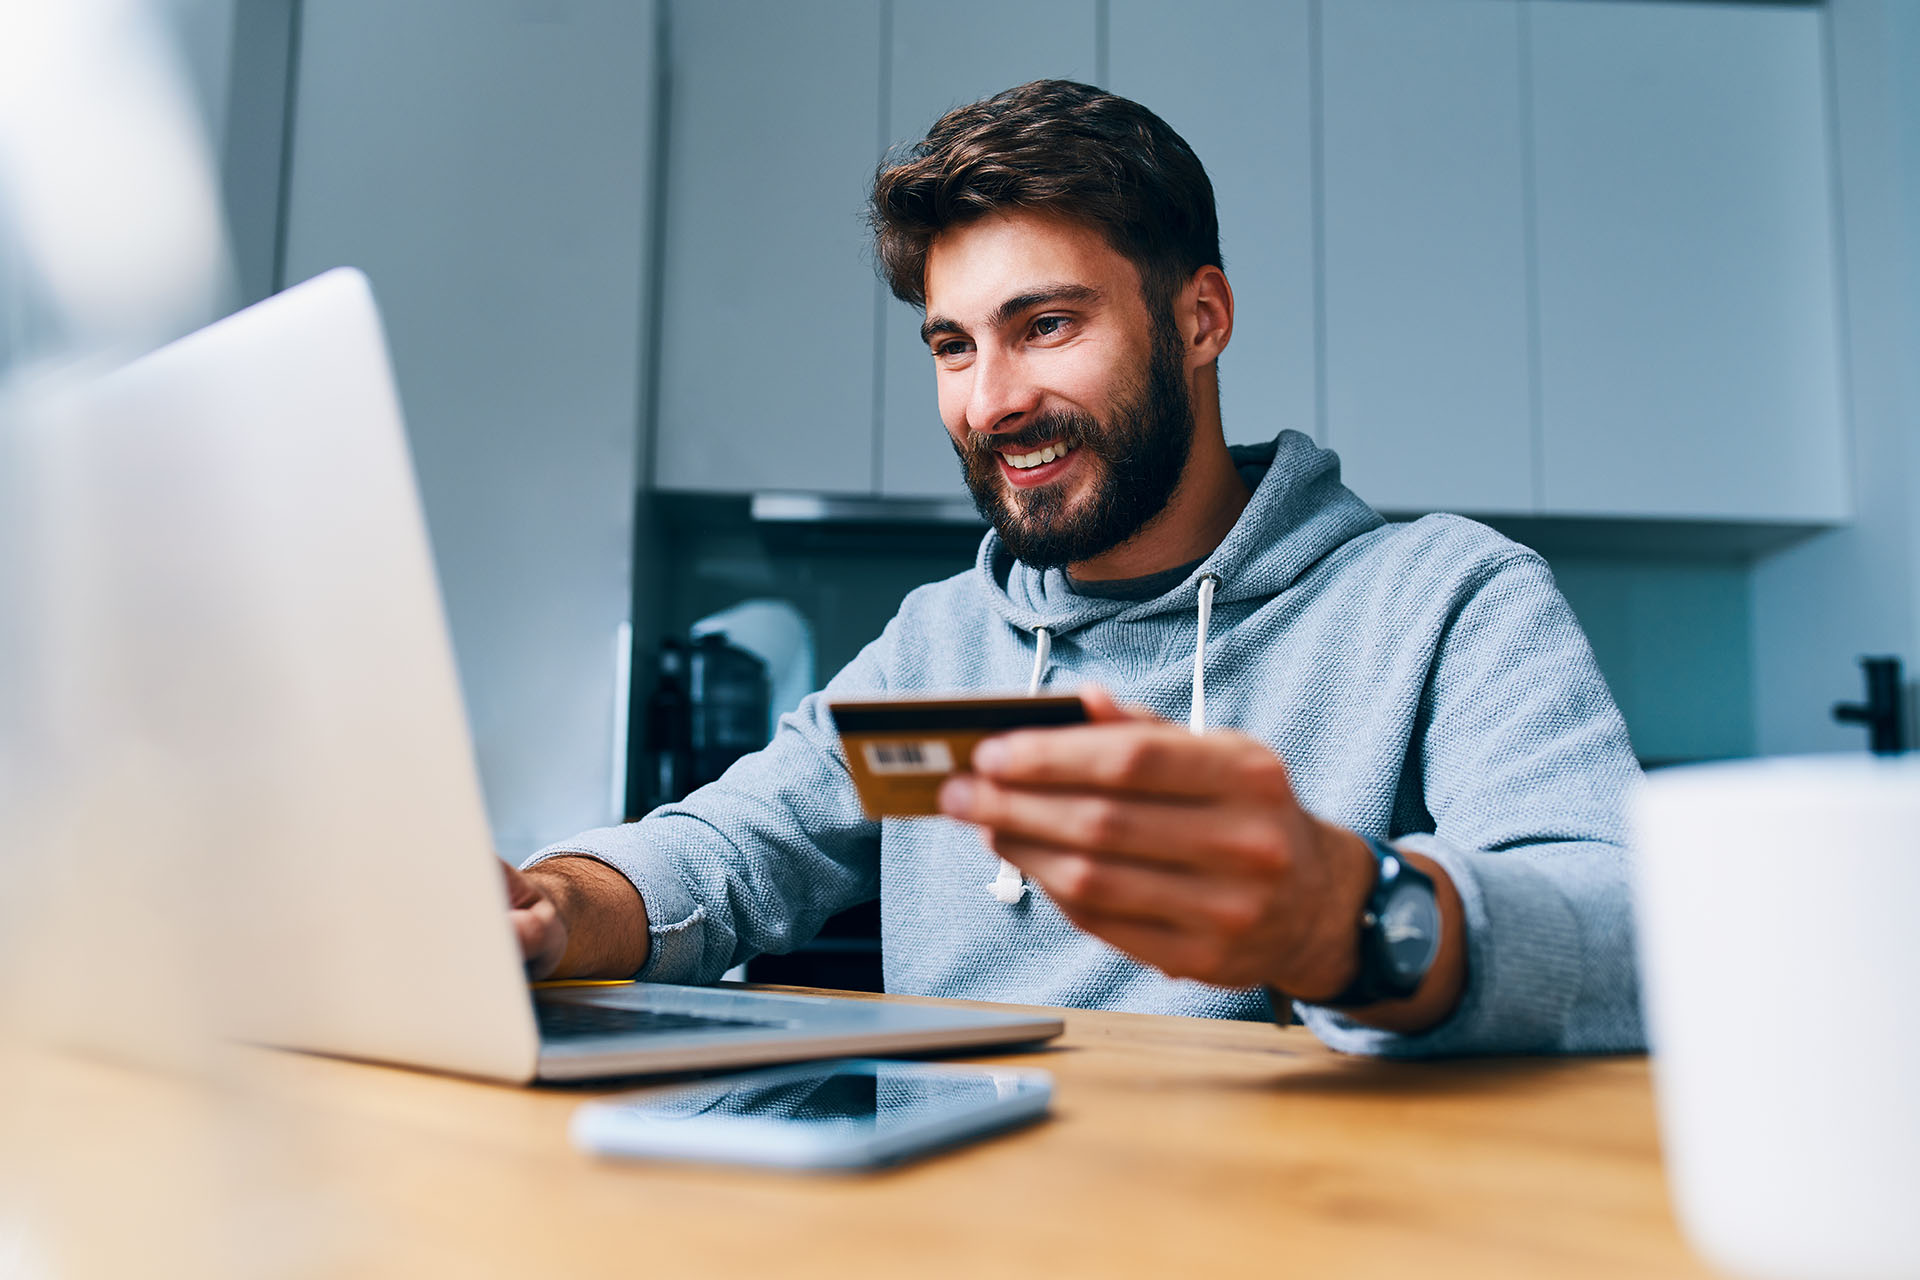 A smiling man sitting in front of a laptop holding a credit card